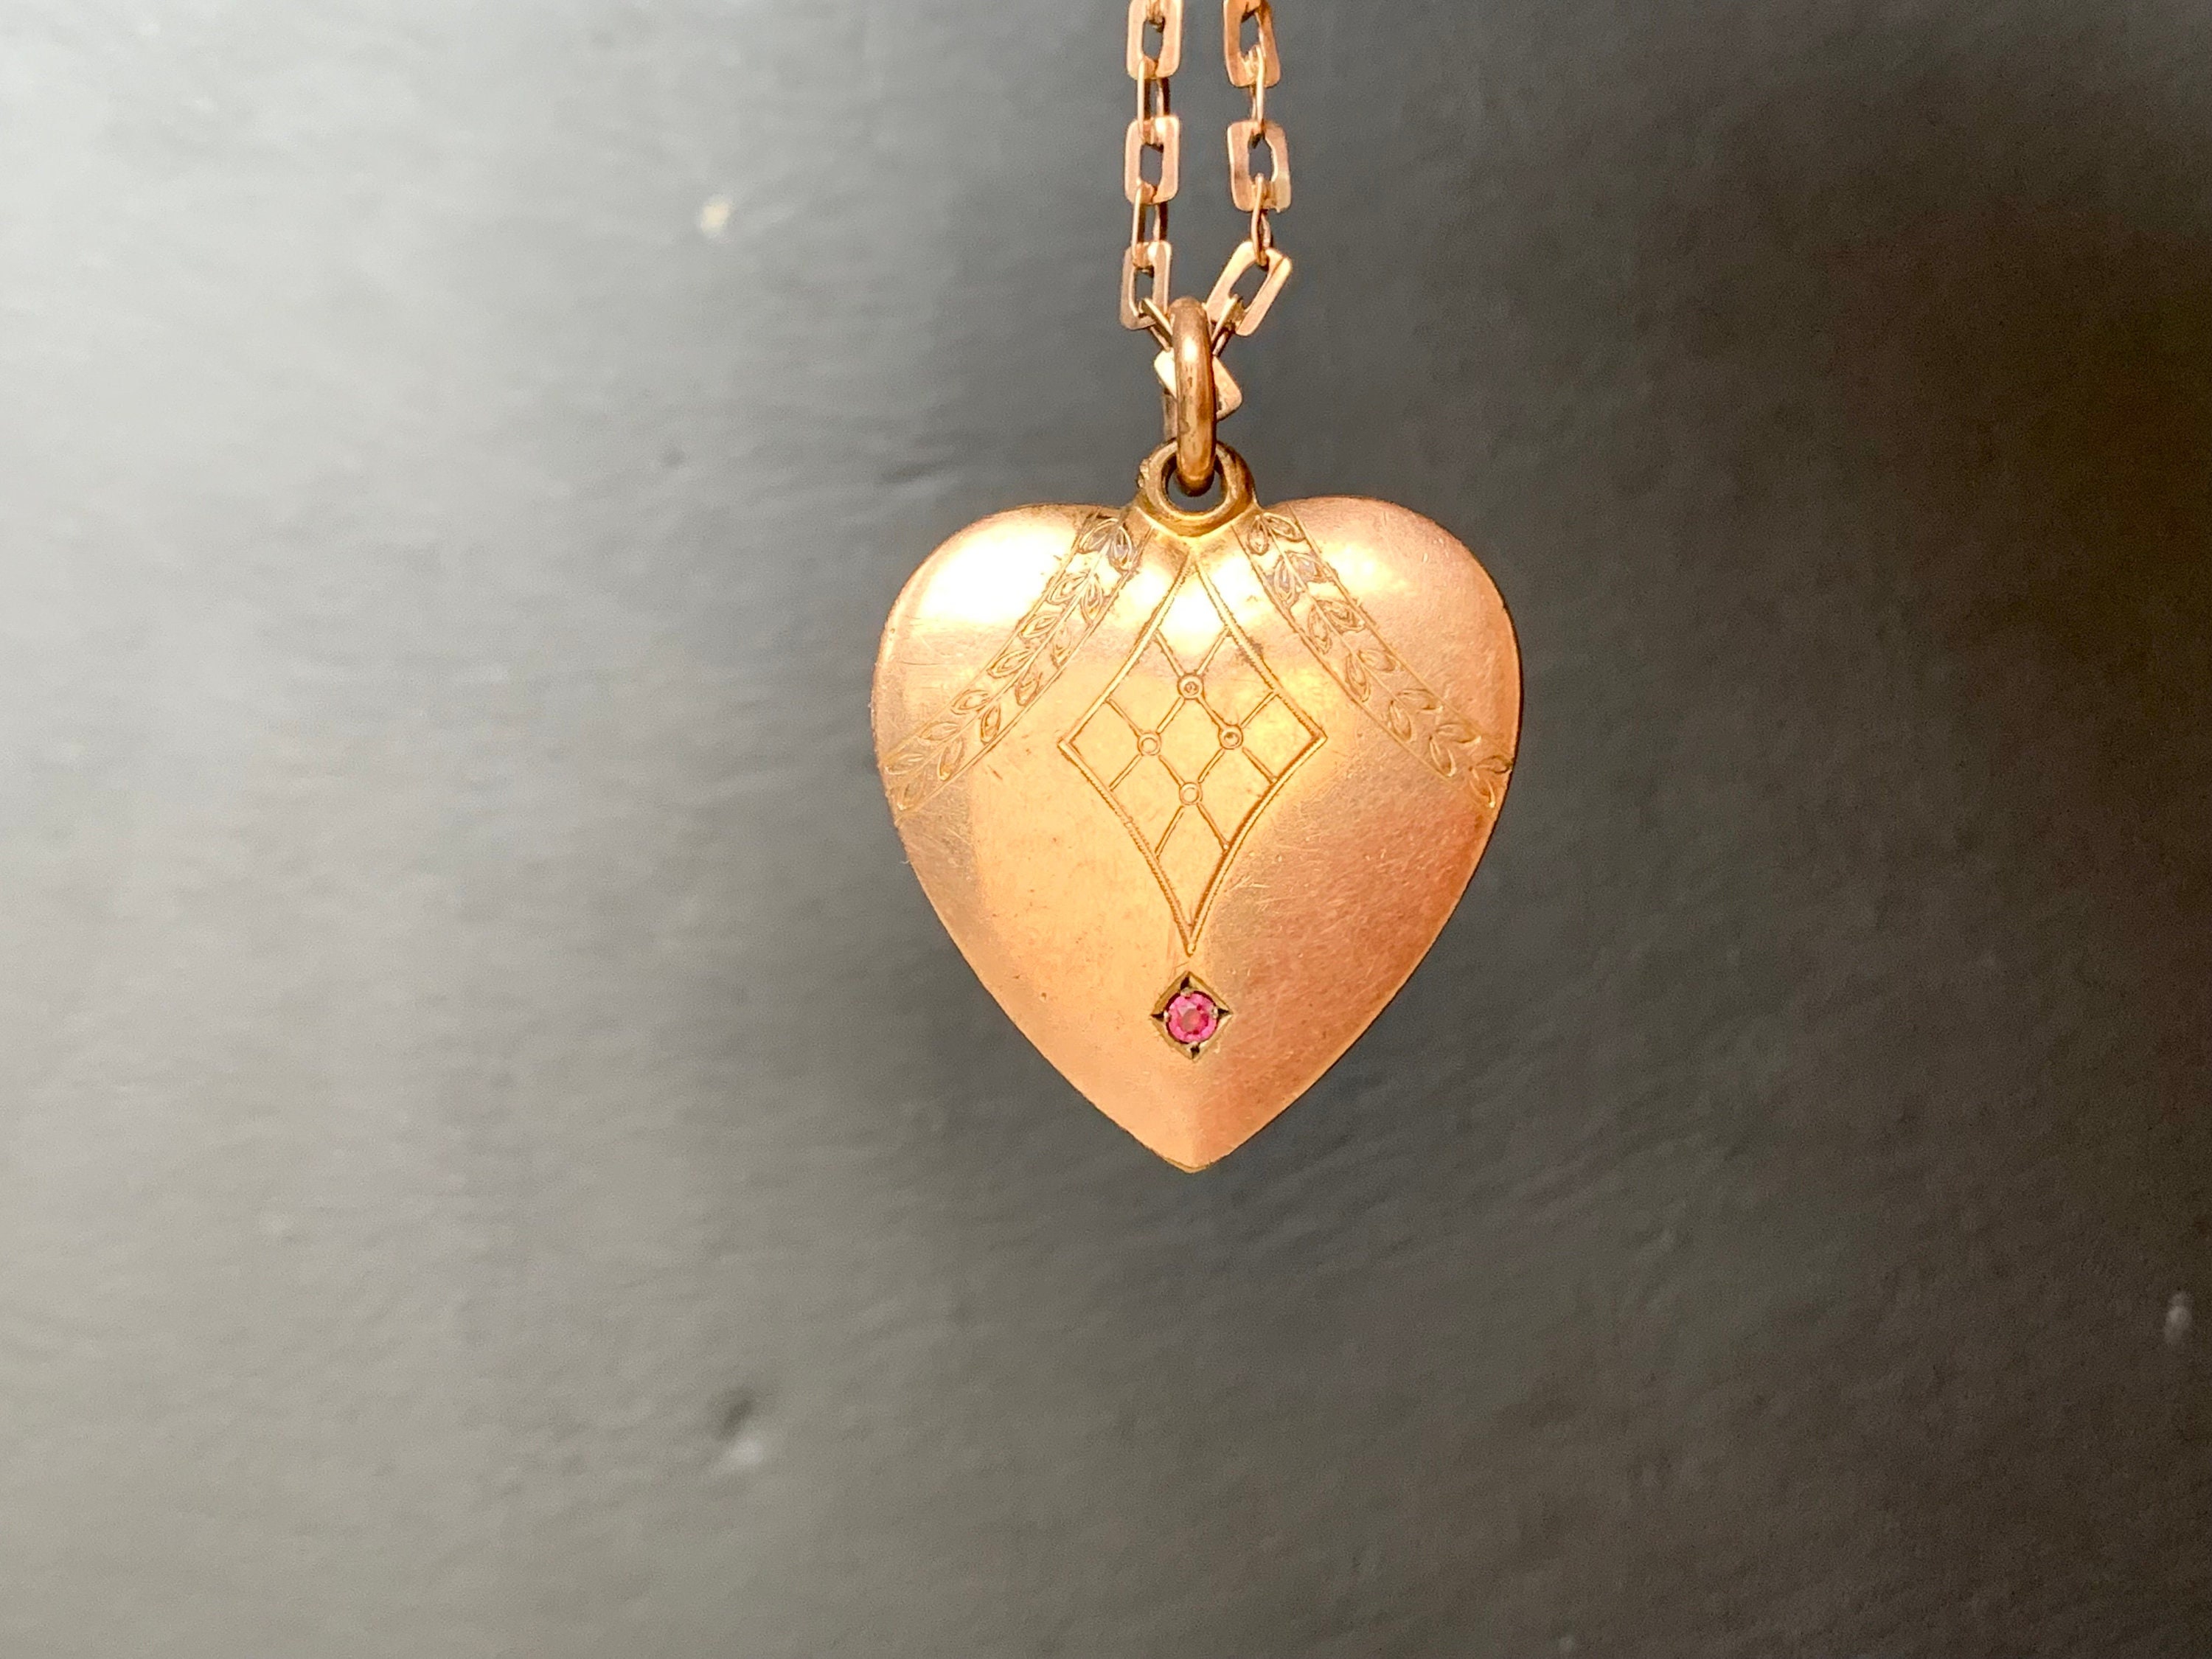 Buy Stylized - Small Victorian Heart